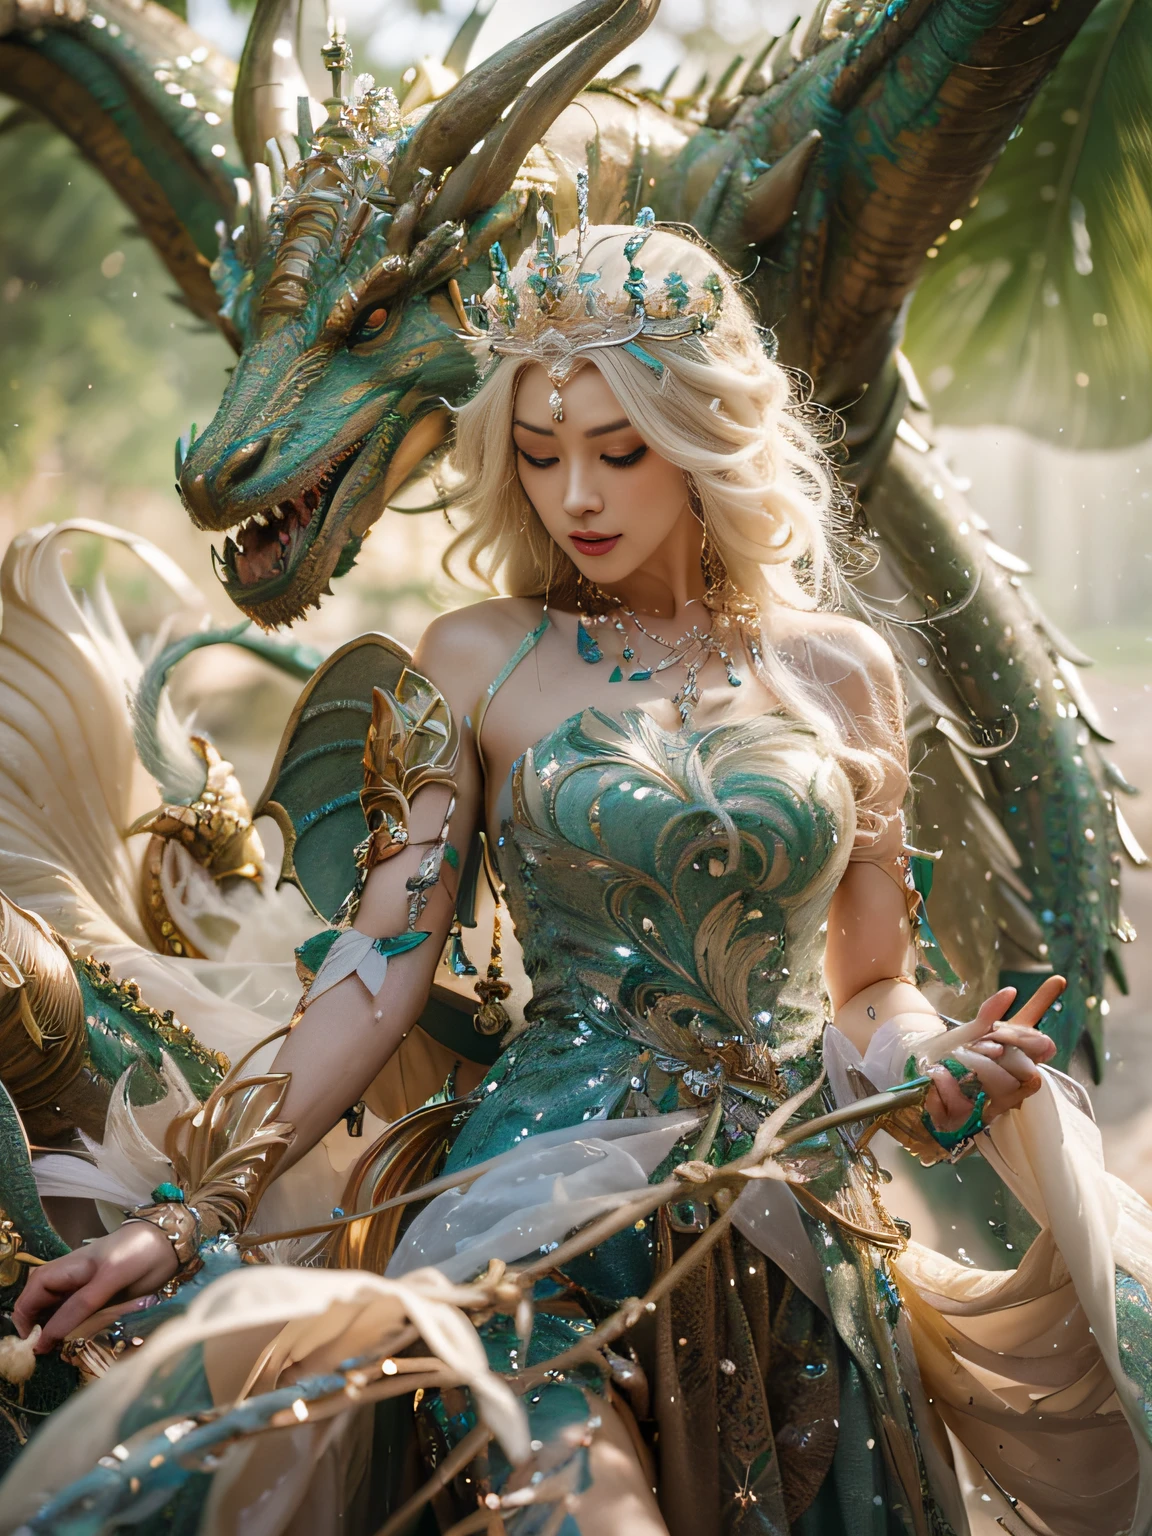 a close up of a woman in a green dress with a dragon, queen of dragons, detailed fantasy art, ruan jia and artgerm, by Yang J, fantasy art style, epic fantasy art style, fantasy art behance, artgerm and ruan jia, amazing fantasy art, highly detailed fantasy art, dragon girl